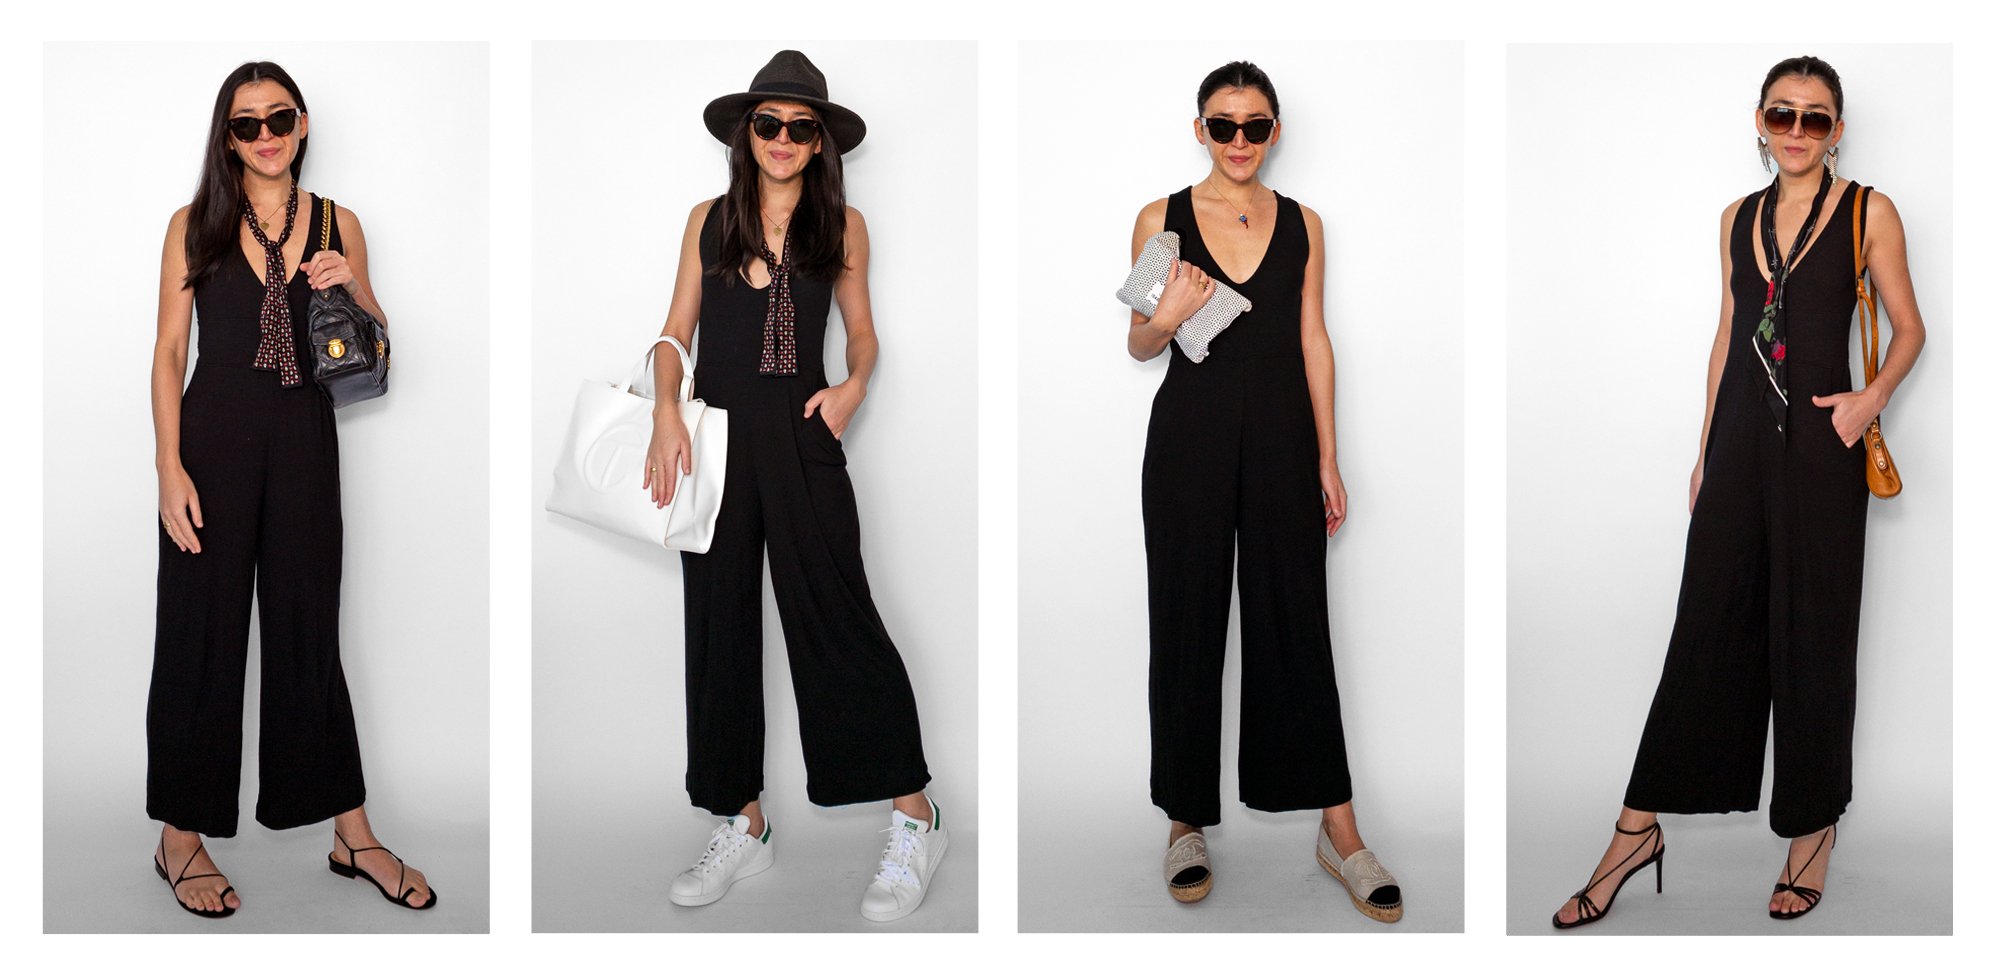 5 Unconventional Ways To Wear Your Jumpsuit